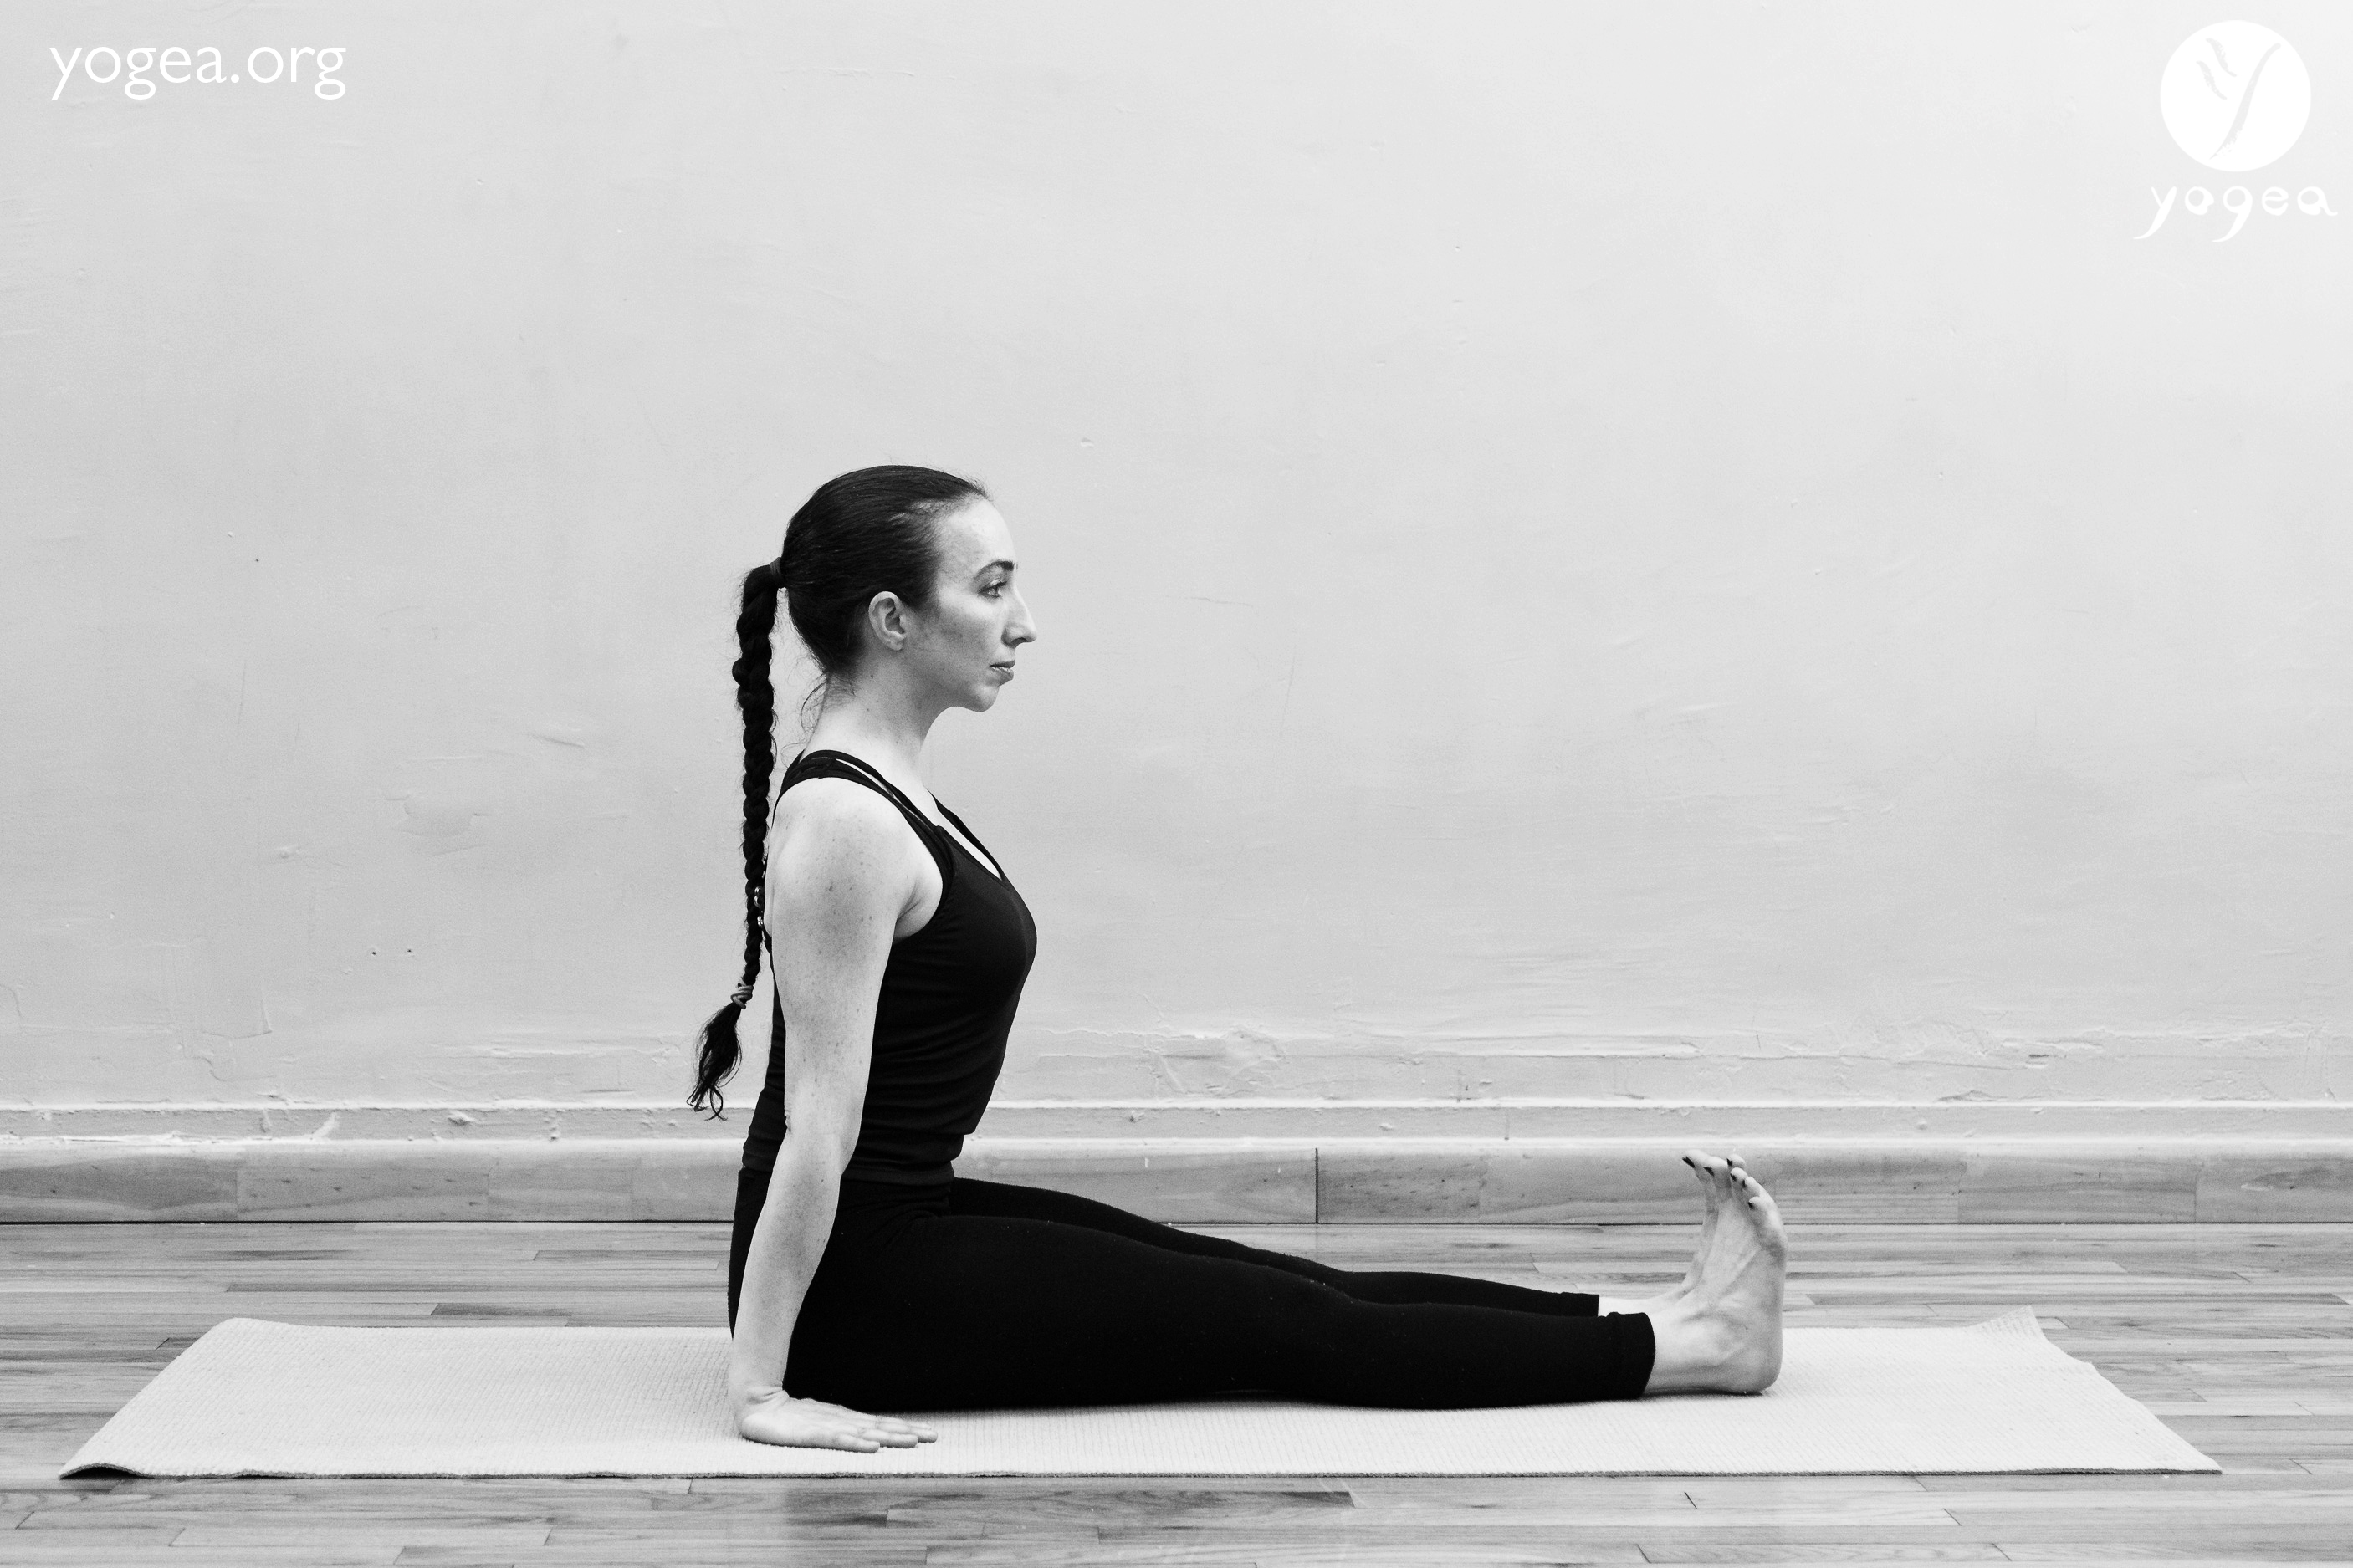 Yoga For Depression: 10 Asanas to Help You Relieve Stress And Anxiety